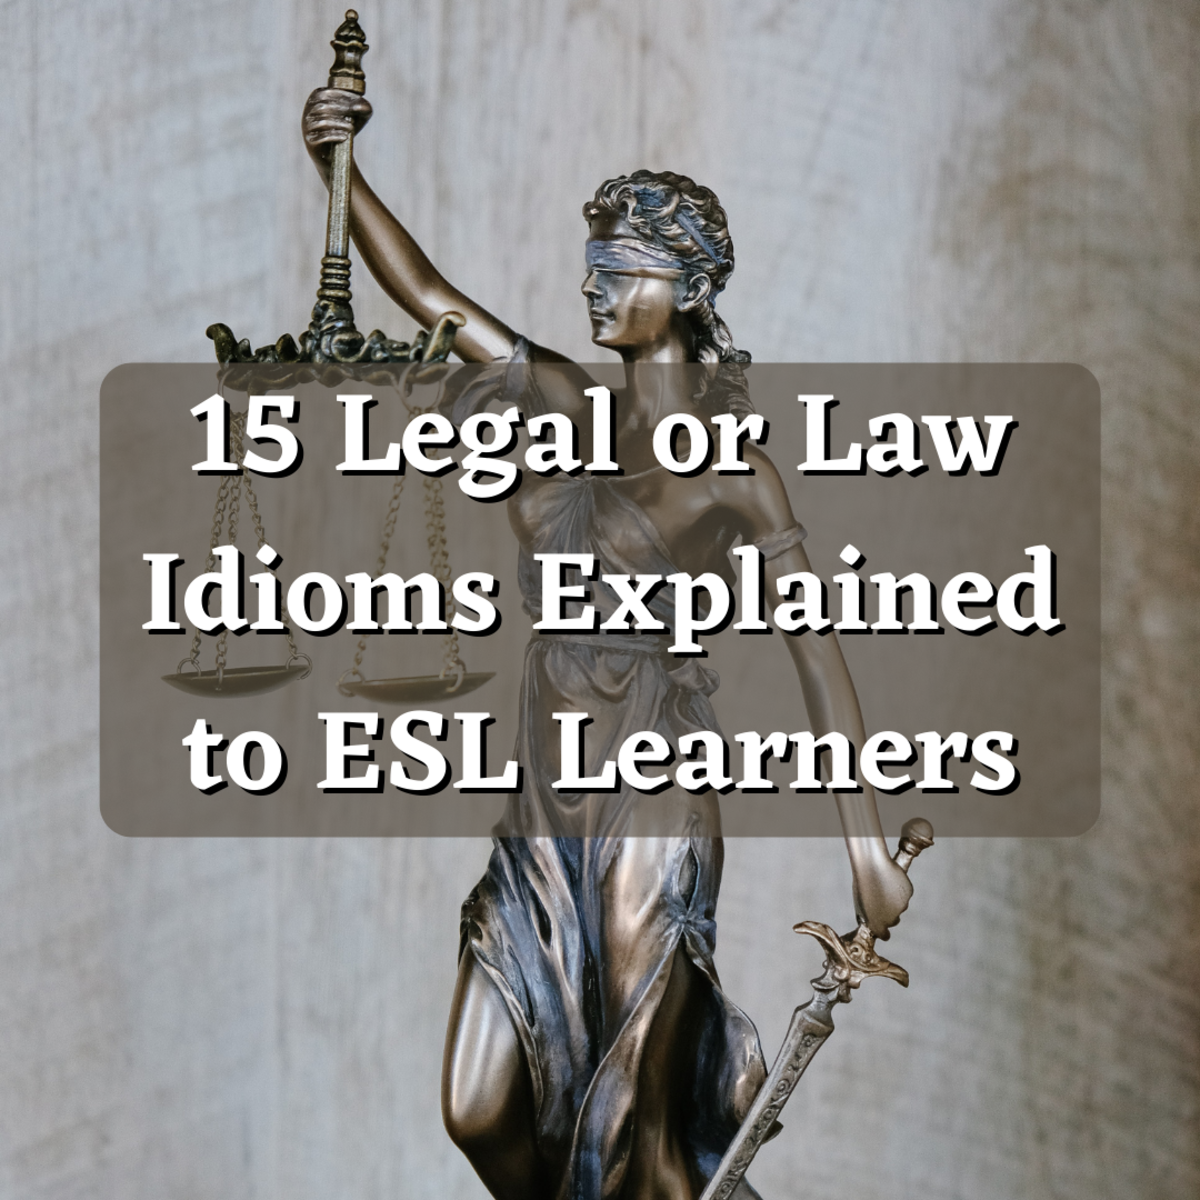 15 Legal or Law Idioms Explained to ESL Learners